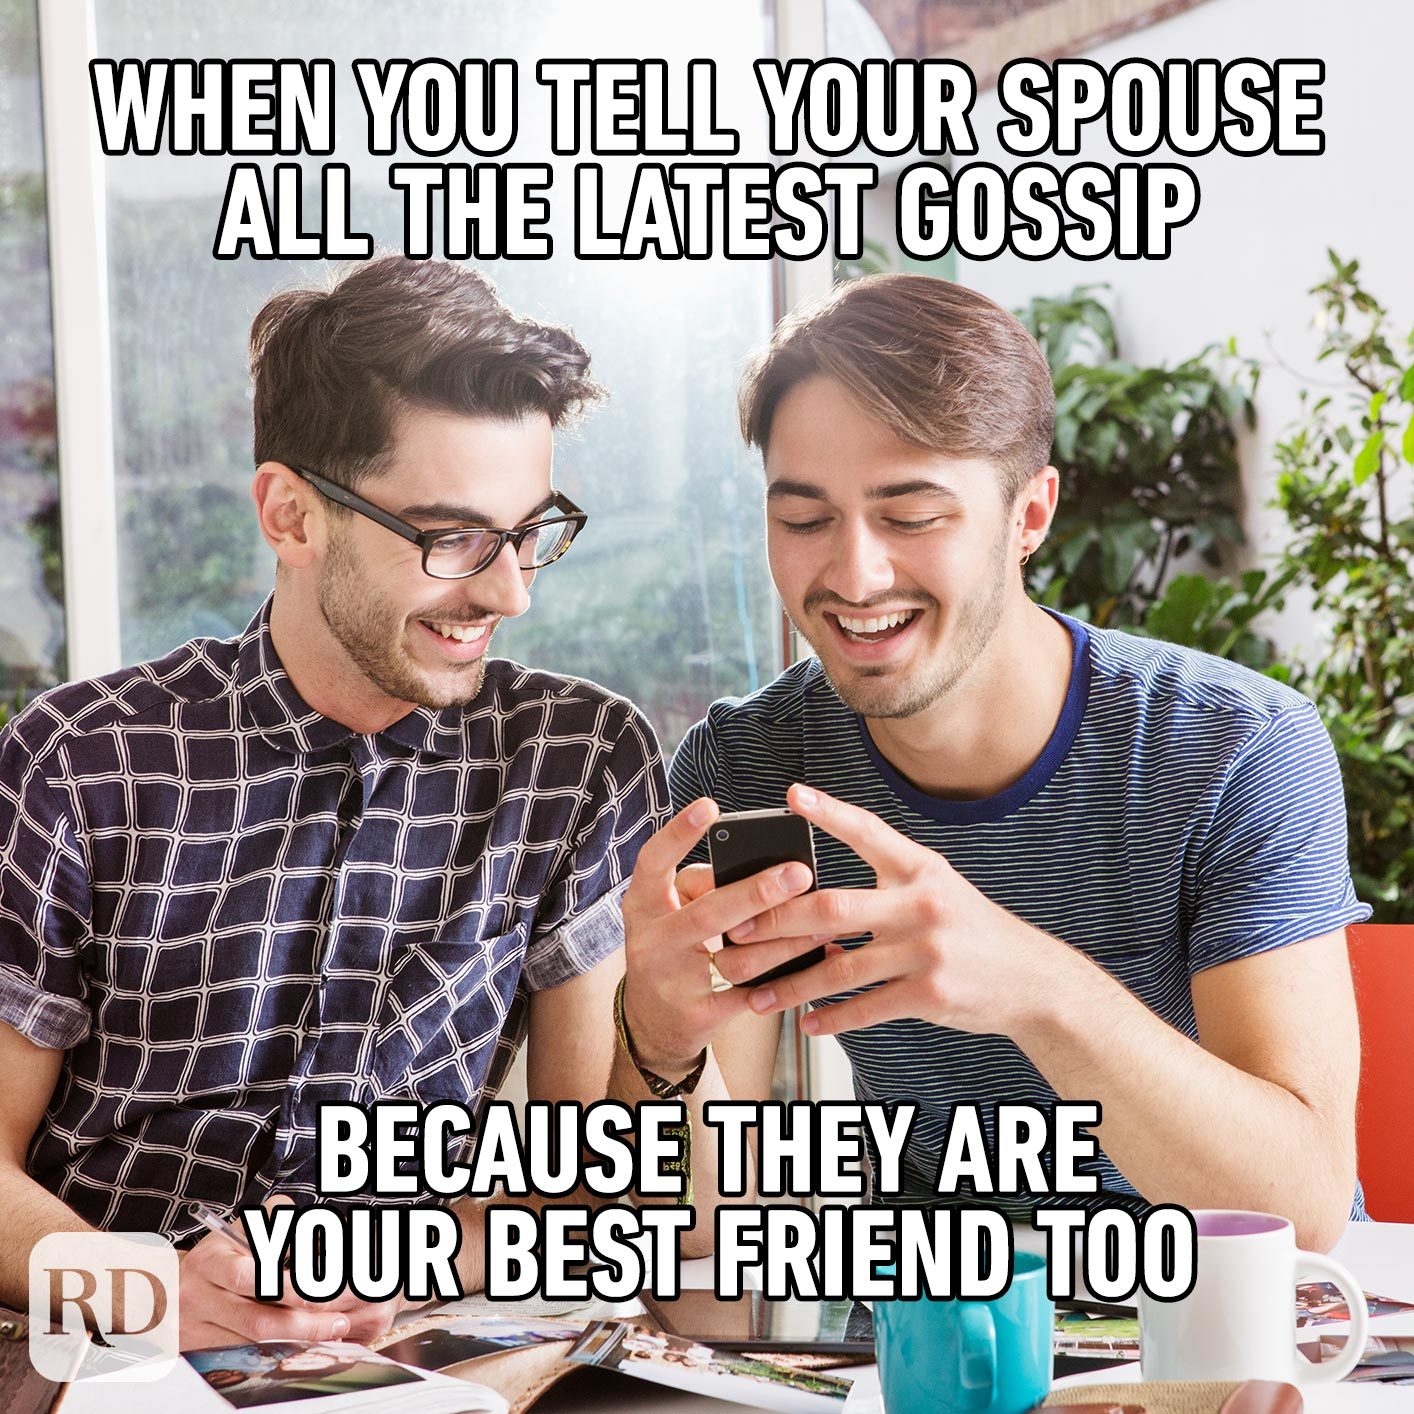 17 Marriage Memes To Make You Laugh | Reader'S Digest